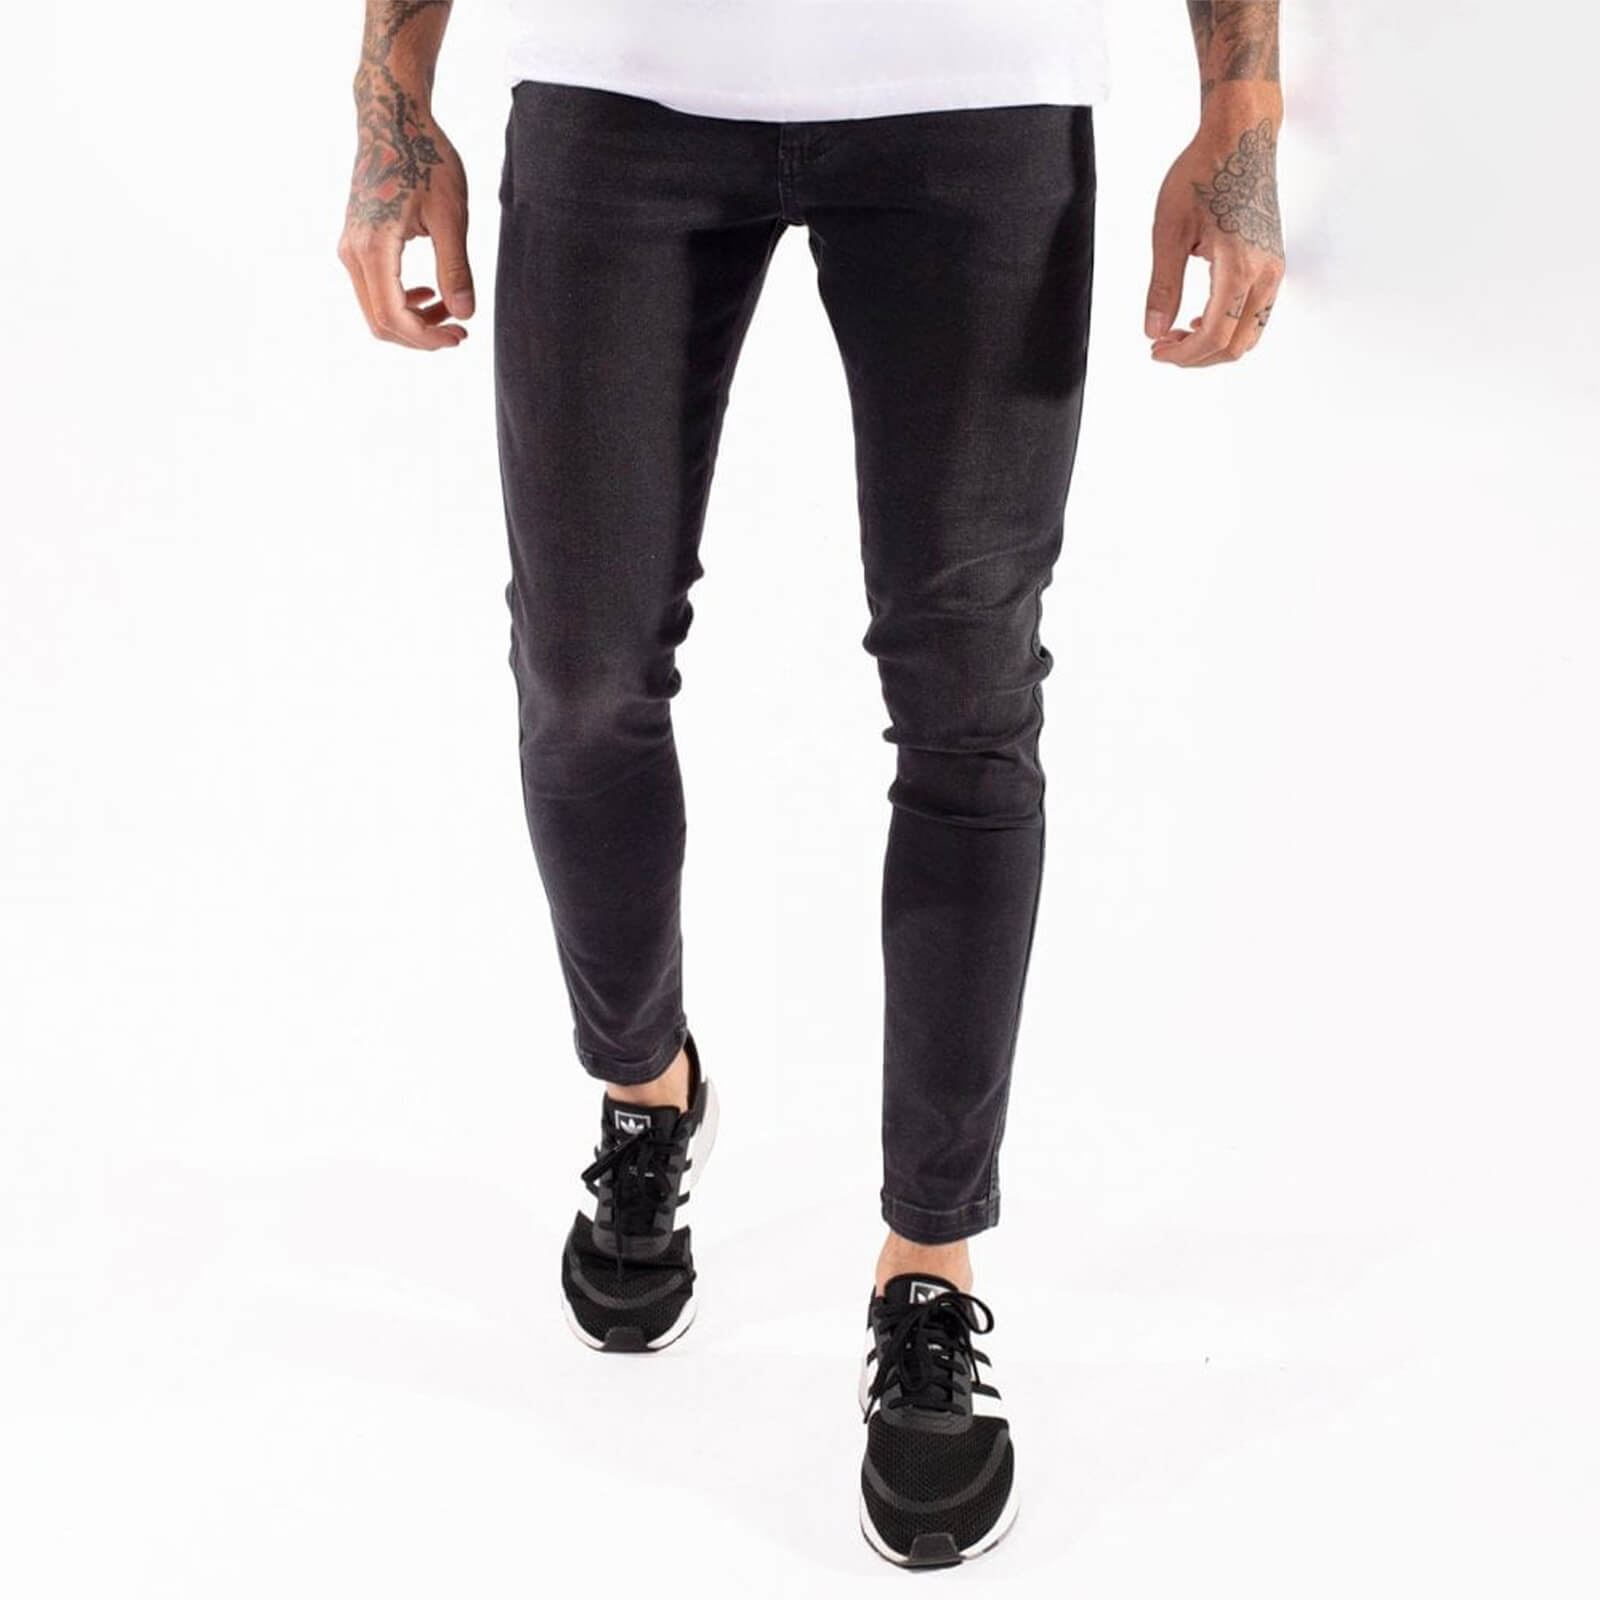 sustainable stretch jeans skinny fit – washed black - w30/l32